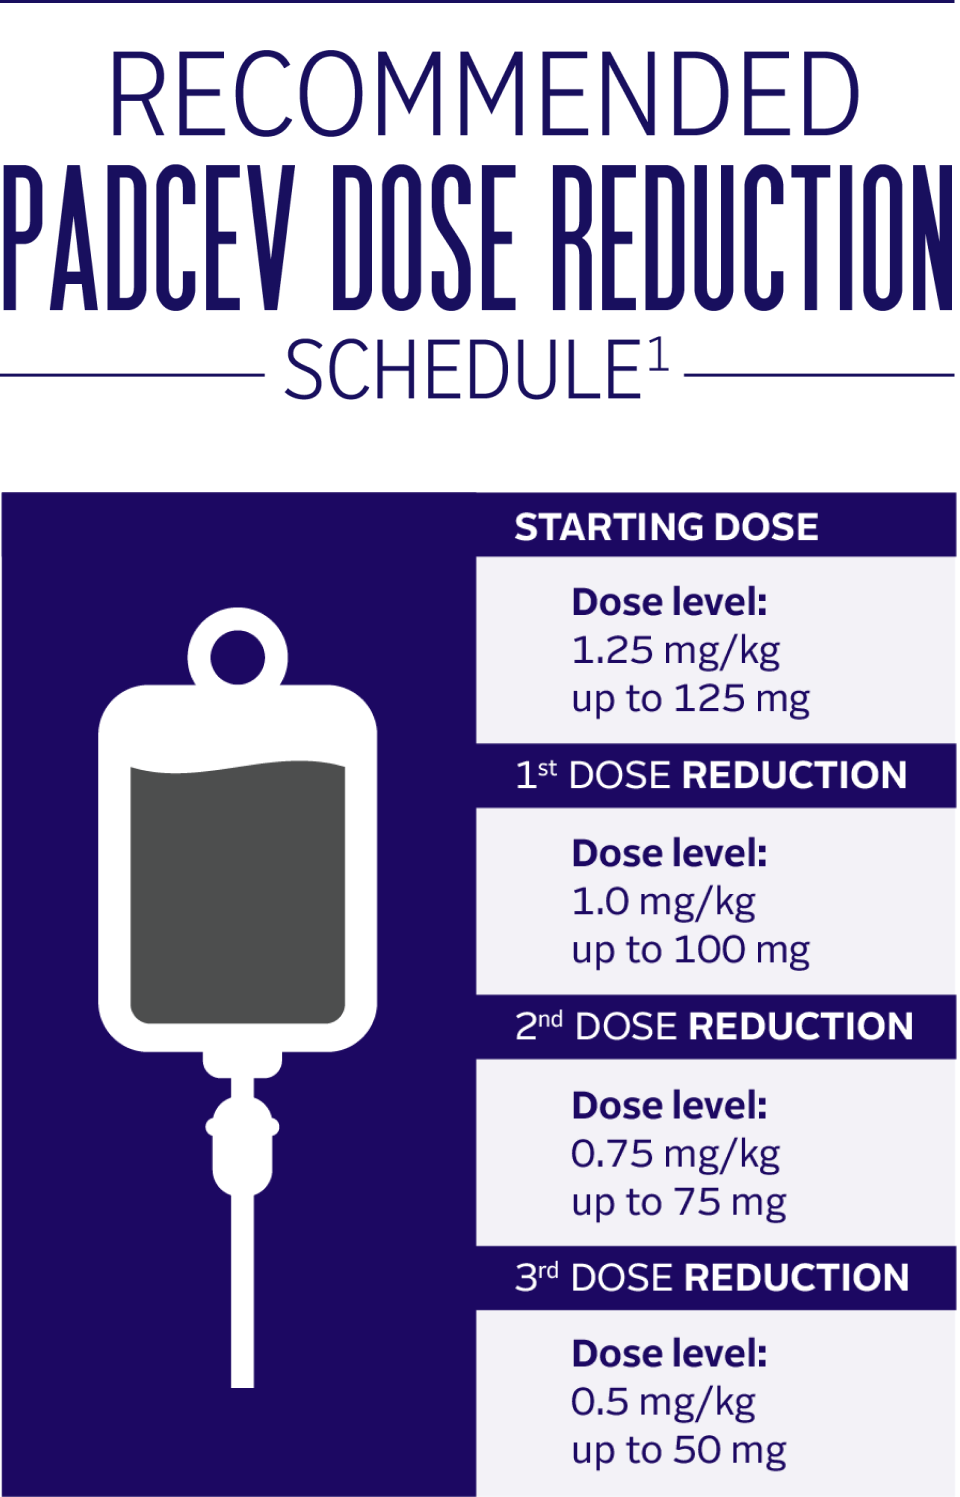 Dose reduction schedule.